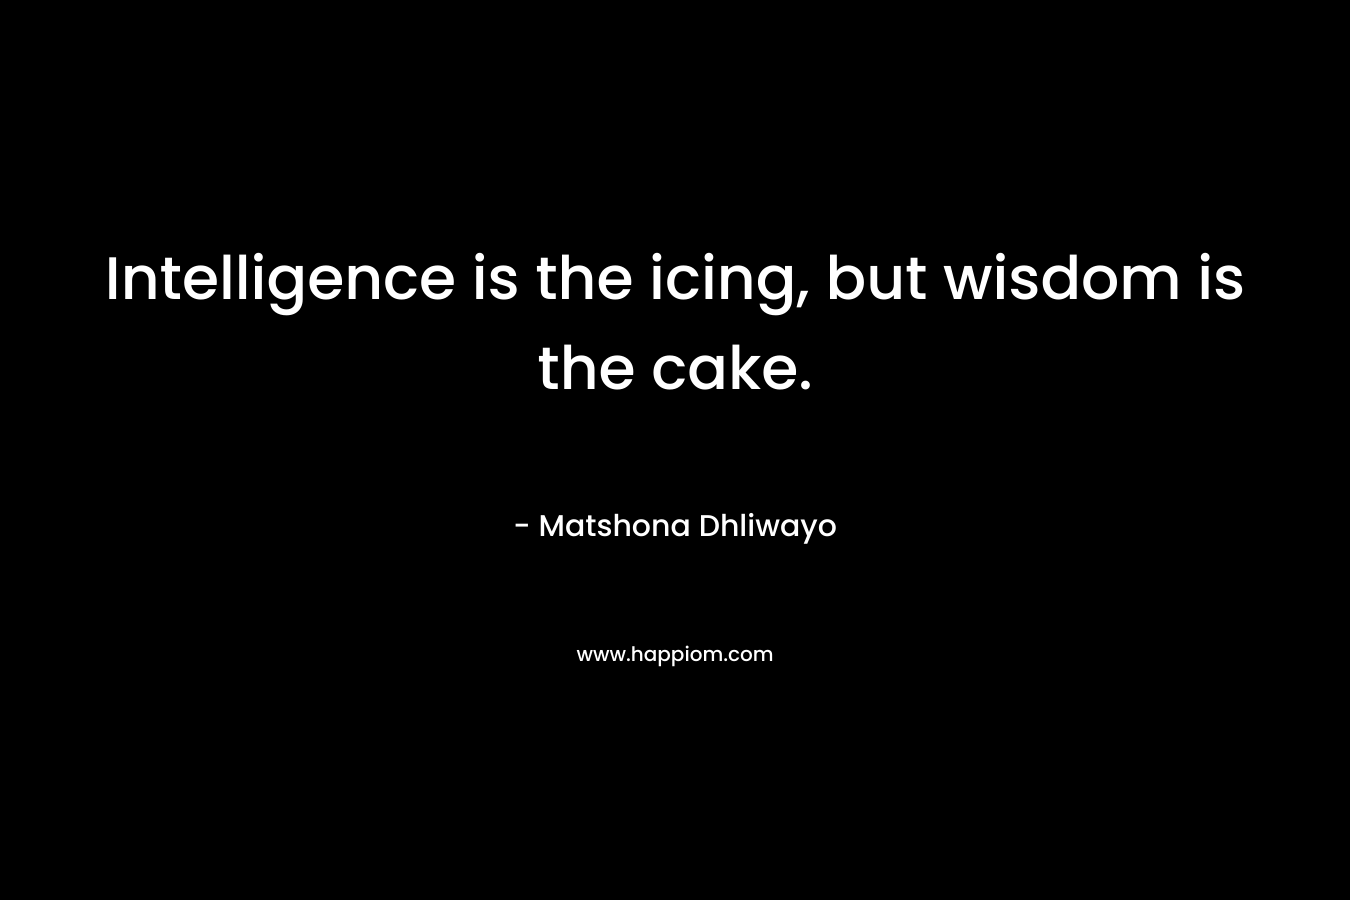 Intelligence is the icing, but wisdom is the cake.